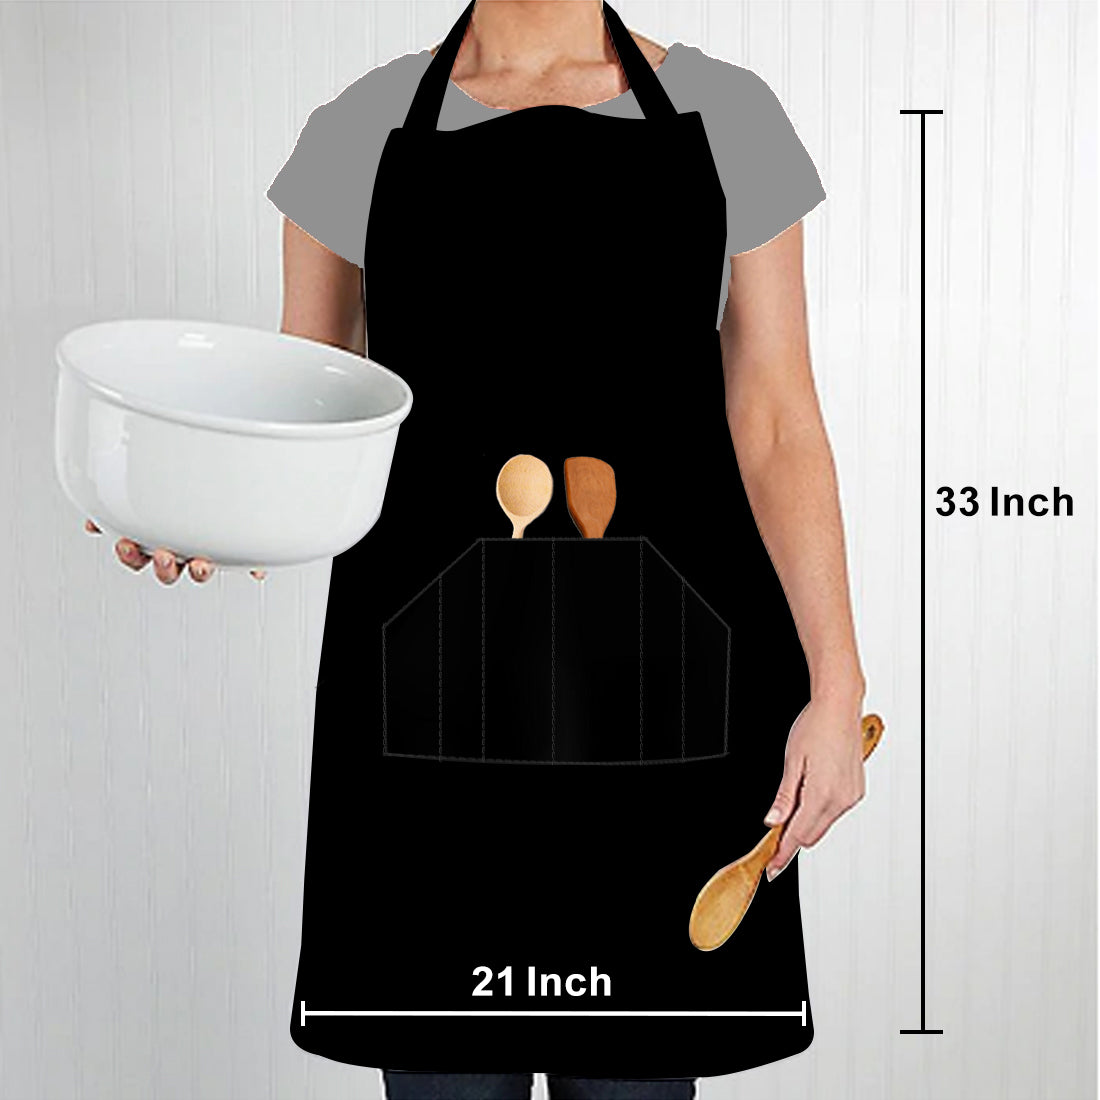 Baking Aprons for Women Baking Gifts for Bakers, Adjustable Kitchen Cooking  Aprons With 2 Pockets Baking Queen 